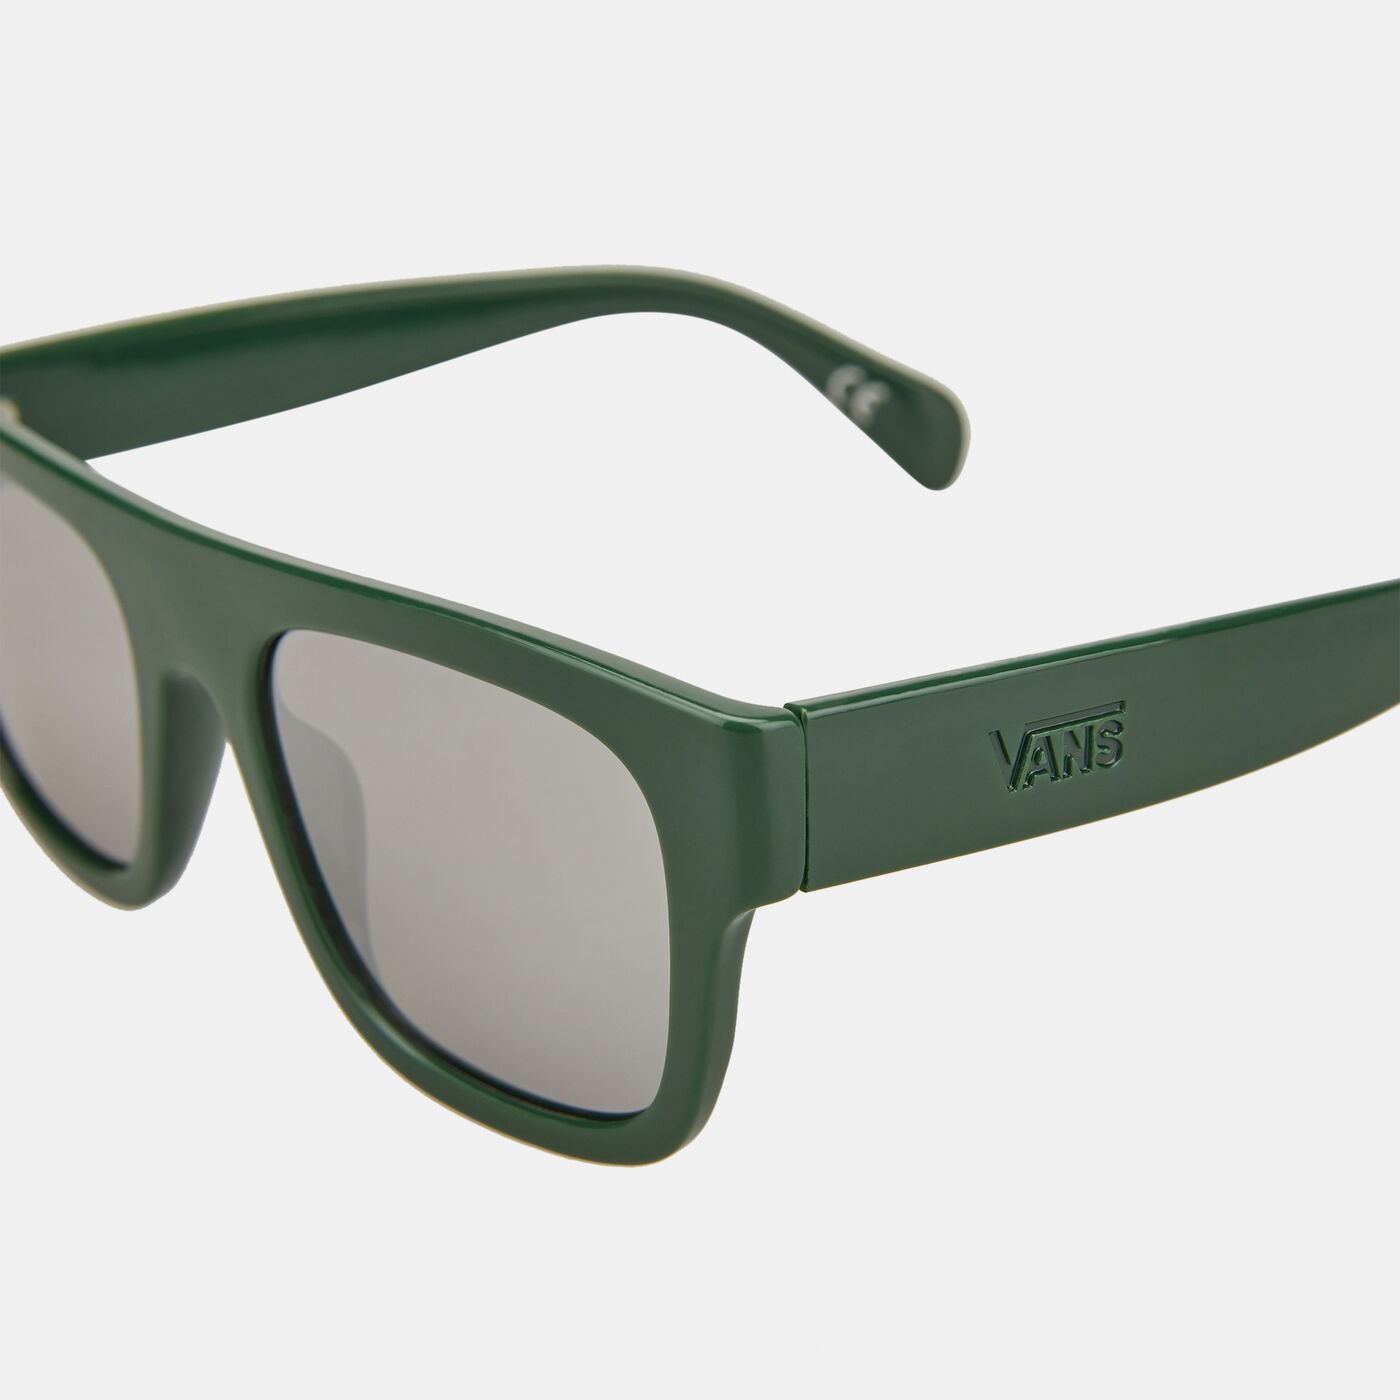 Men's Squared Off Shades